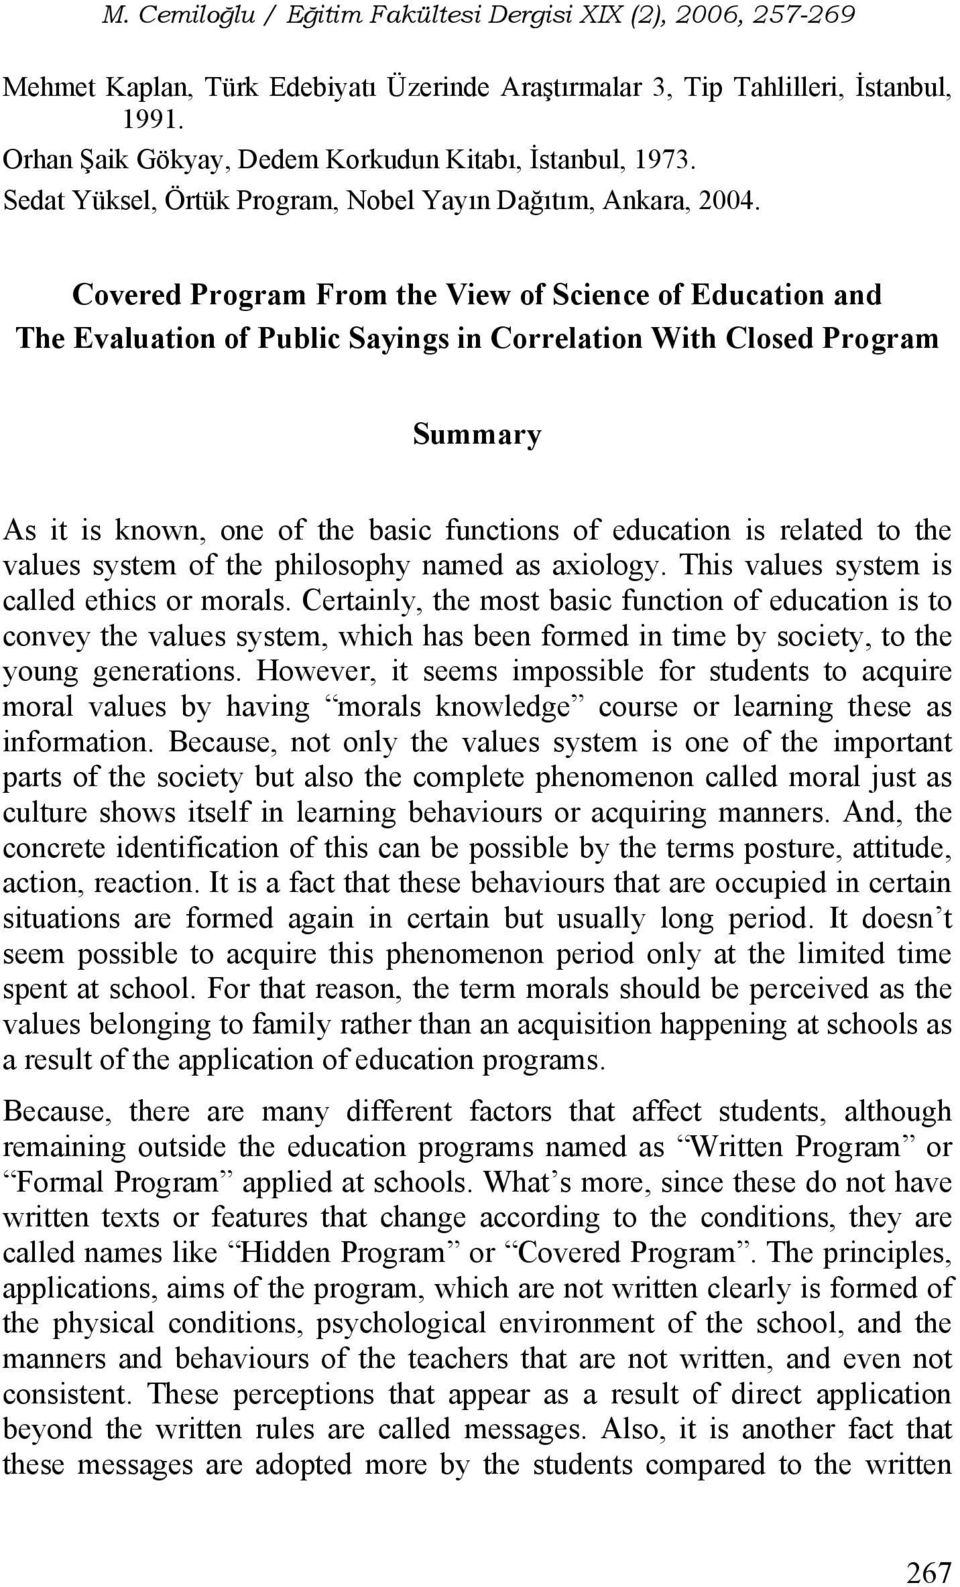 Covered Program From the View of Science of Education and The Evaluation of Public Sayings in Correlation With Closed Program Summary As it is known, one of the basic functions of education is